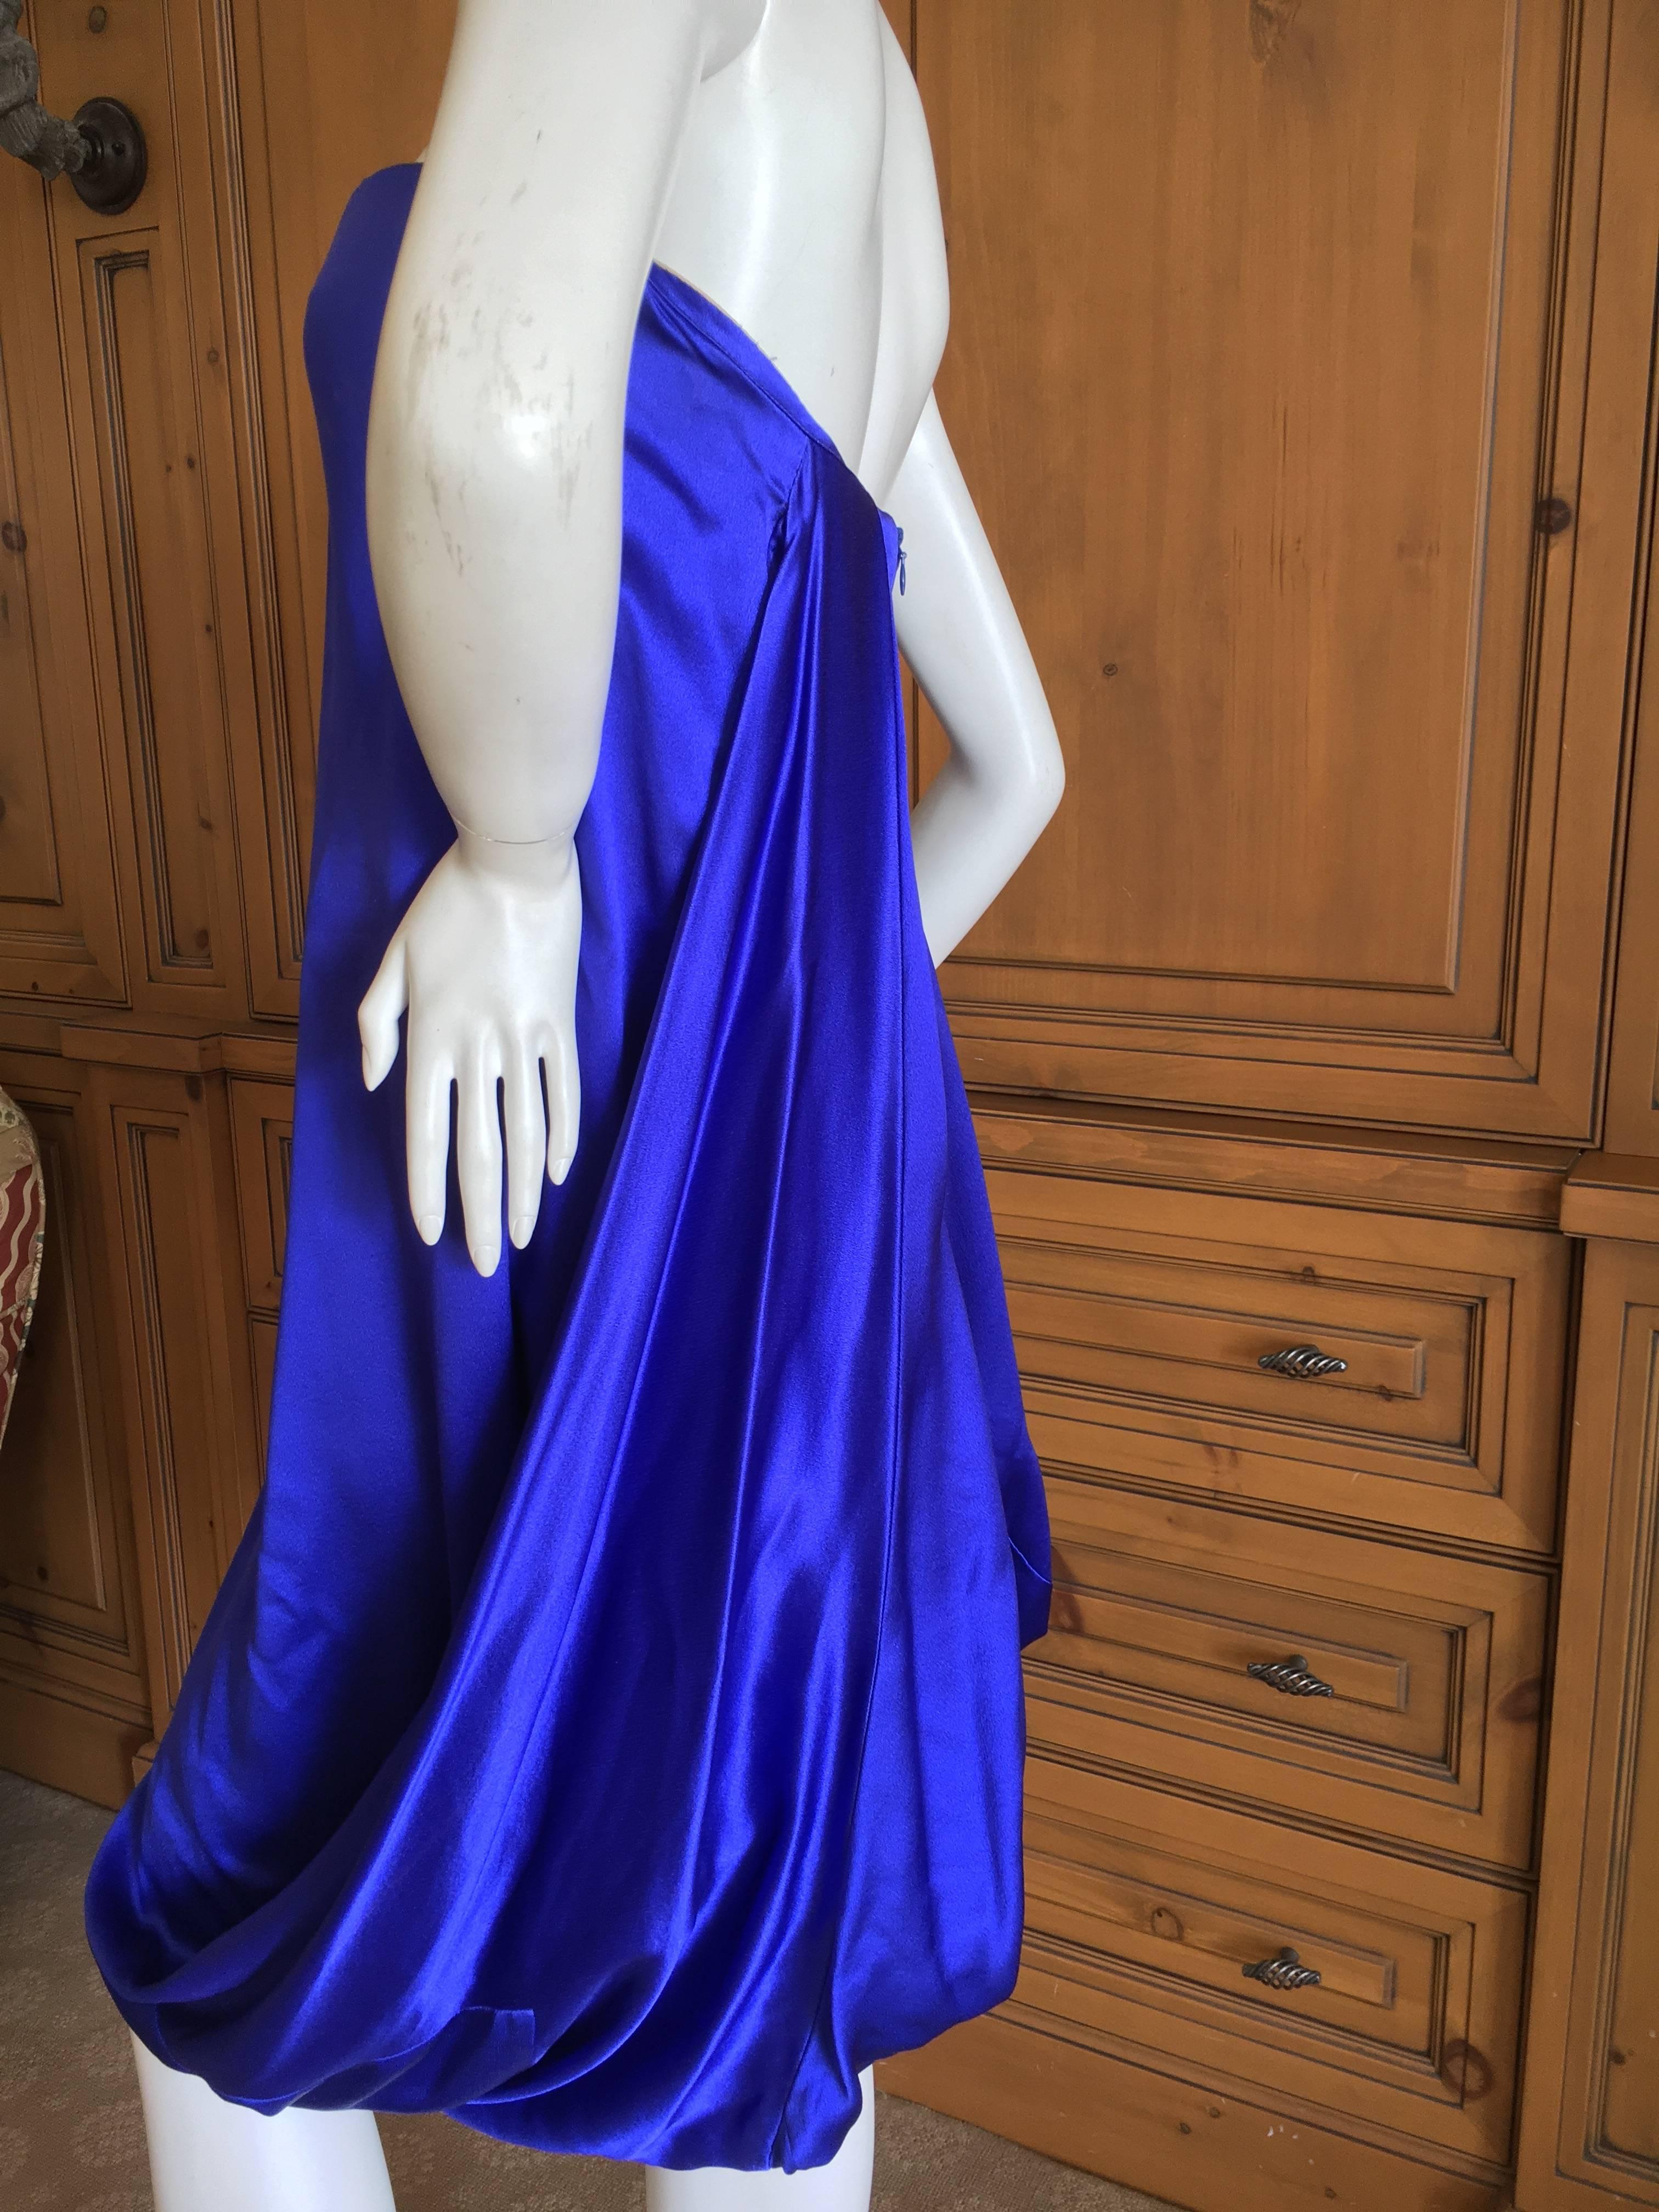 Alexander McQueen 2009 Royal Blue Draped Strapless Dress with Inner Corset For Sale 1